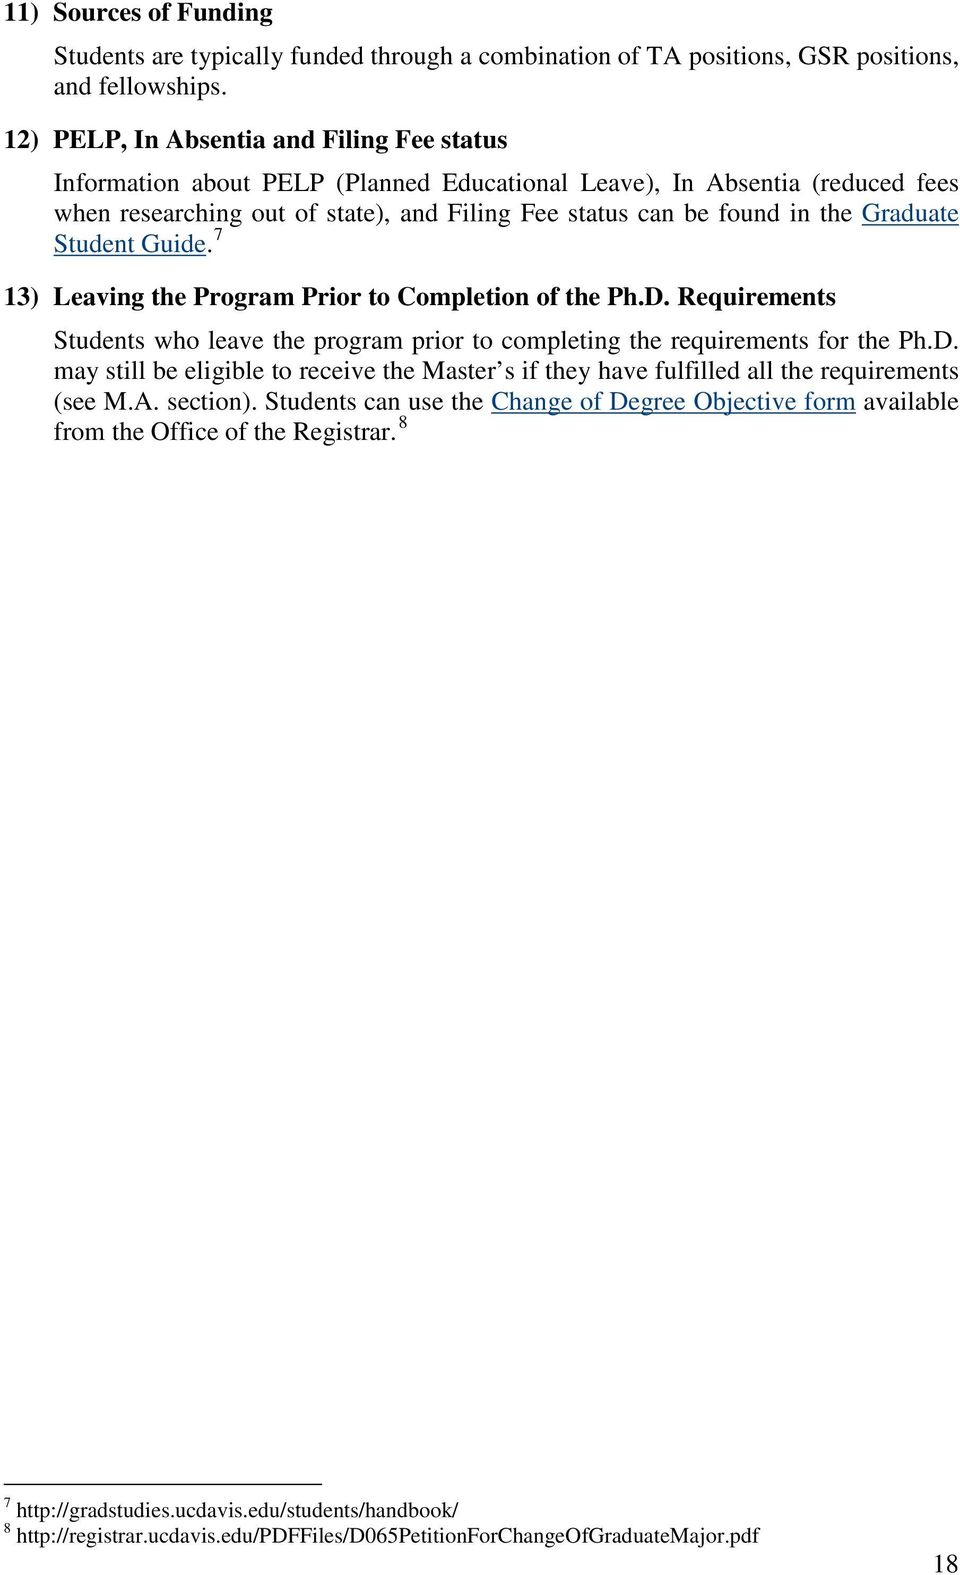 Graduate Student Guide. 7 13) Leaving the Program Prior to Completion of the Ph.D. Requirements Students who leave the program prior to completing the requirements for the Ph.D. may still be eligible to receive the Master s if they have fulfilled all the requirements (see M.